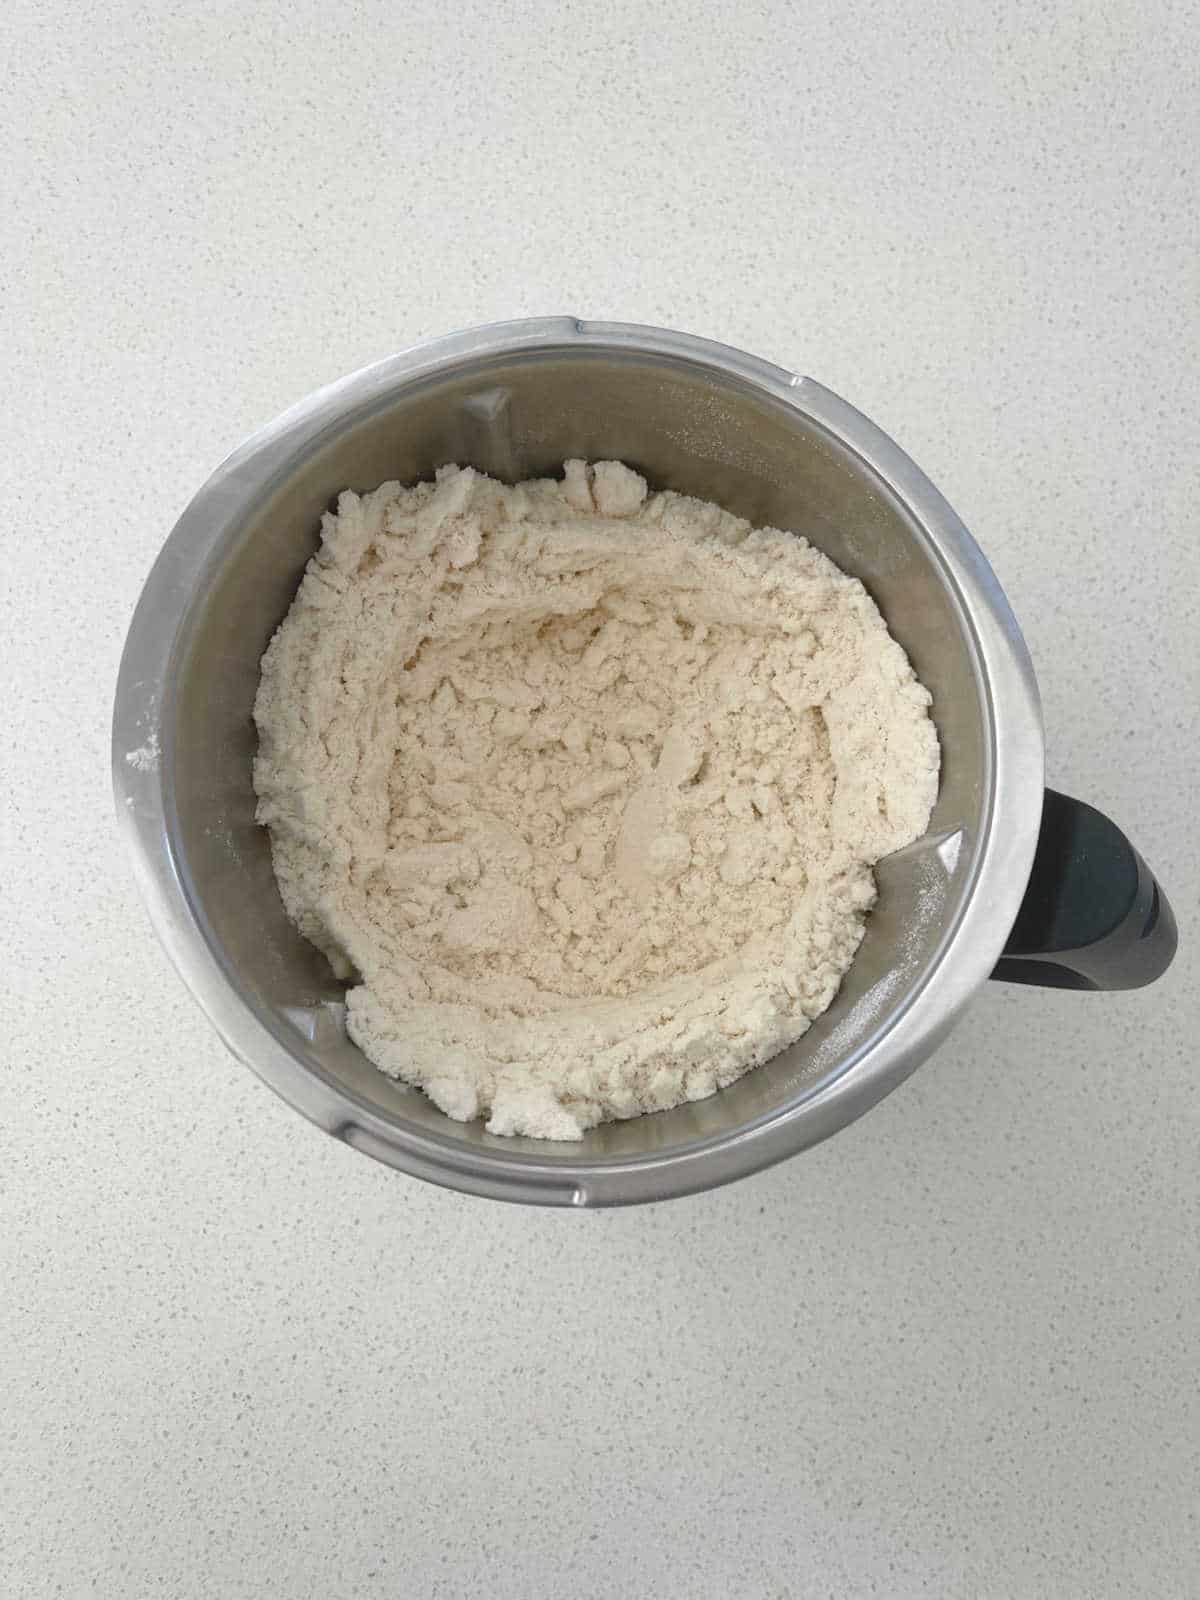 Scone ingredients in a Thermomix bowl.